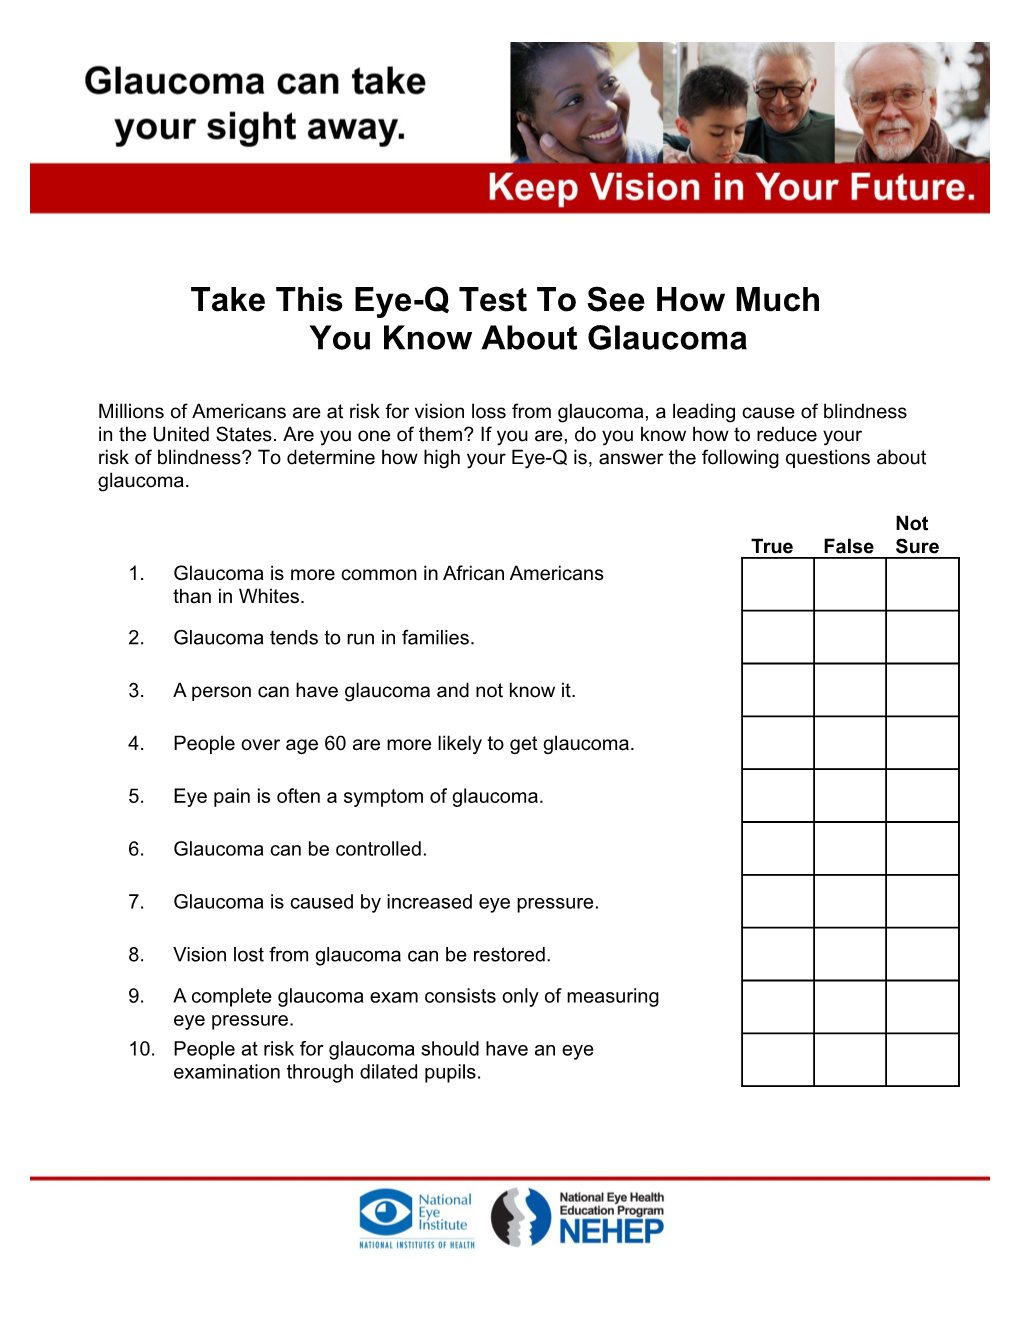 Take This Eye-Q Testto See How Much You Know About Glaucoma